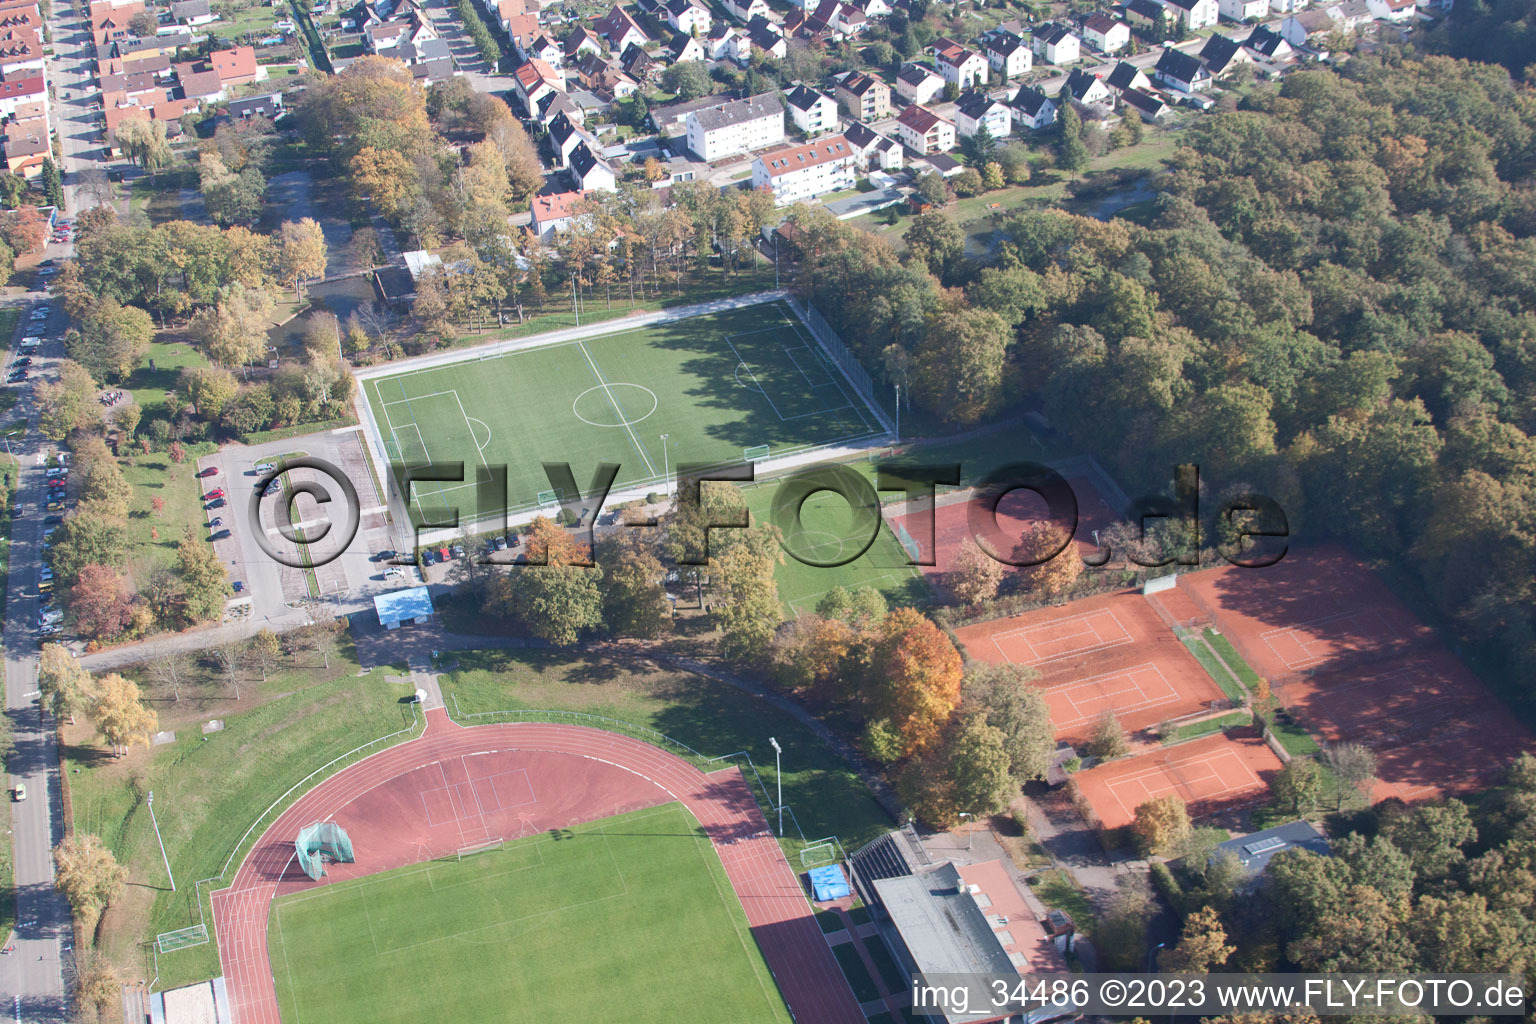 Bienwald Stadium in Kandel in the state Rhineland-Palatinate, Germany from the plane